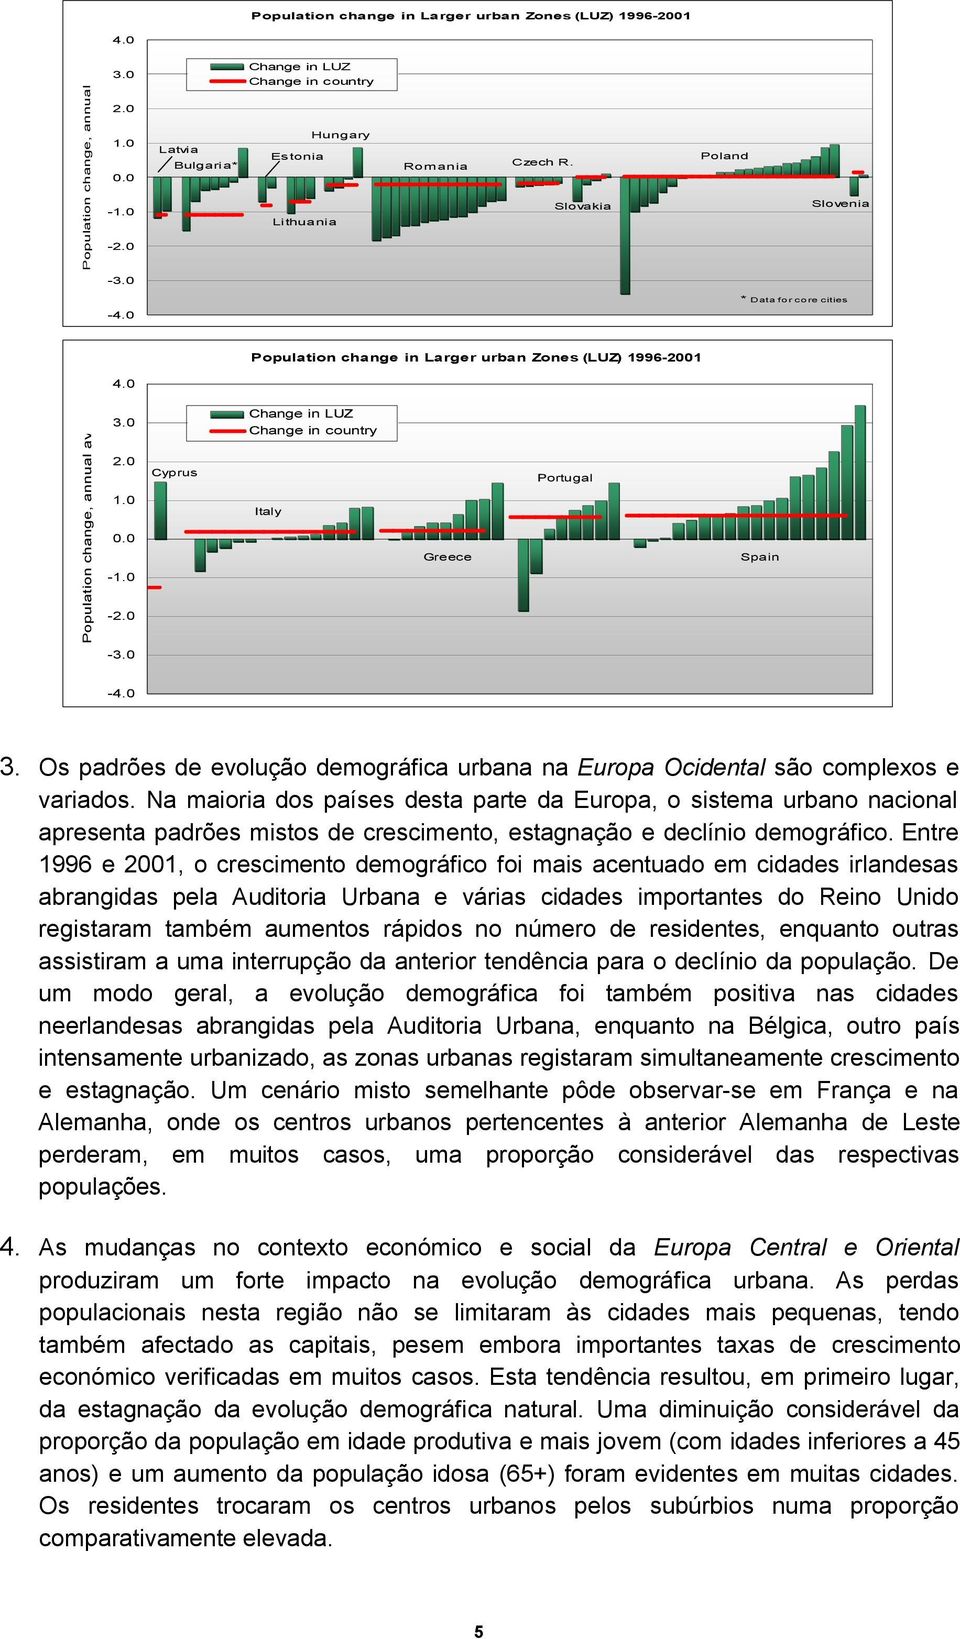 0 * Data for core cities -4.0 0 Cyprus Population change in Larger urban Zones (LUZ) 1996-2001 Change in LUZ Change in country Italy Greece Portugal Spain -3.0-4.0 3.